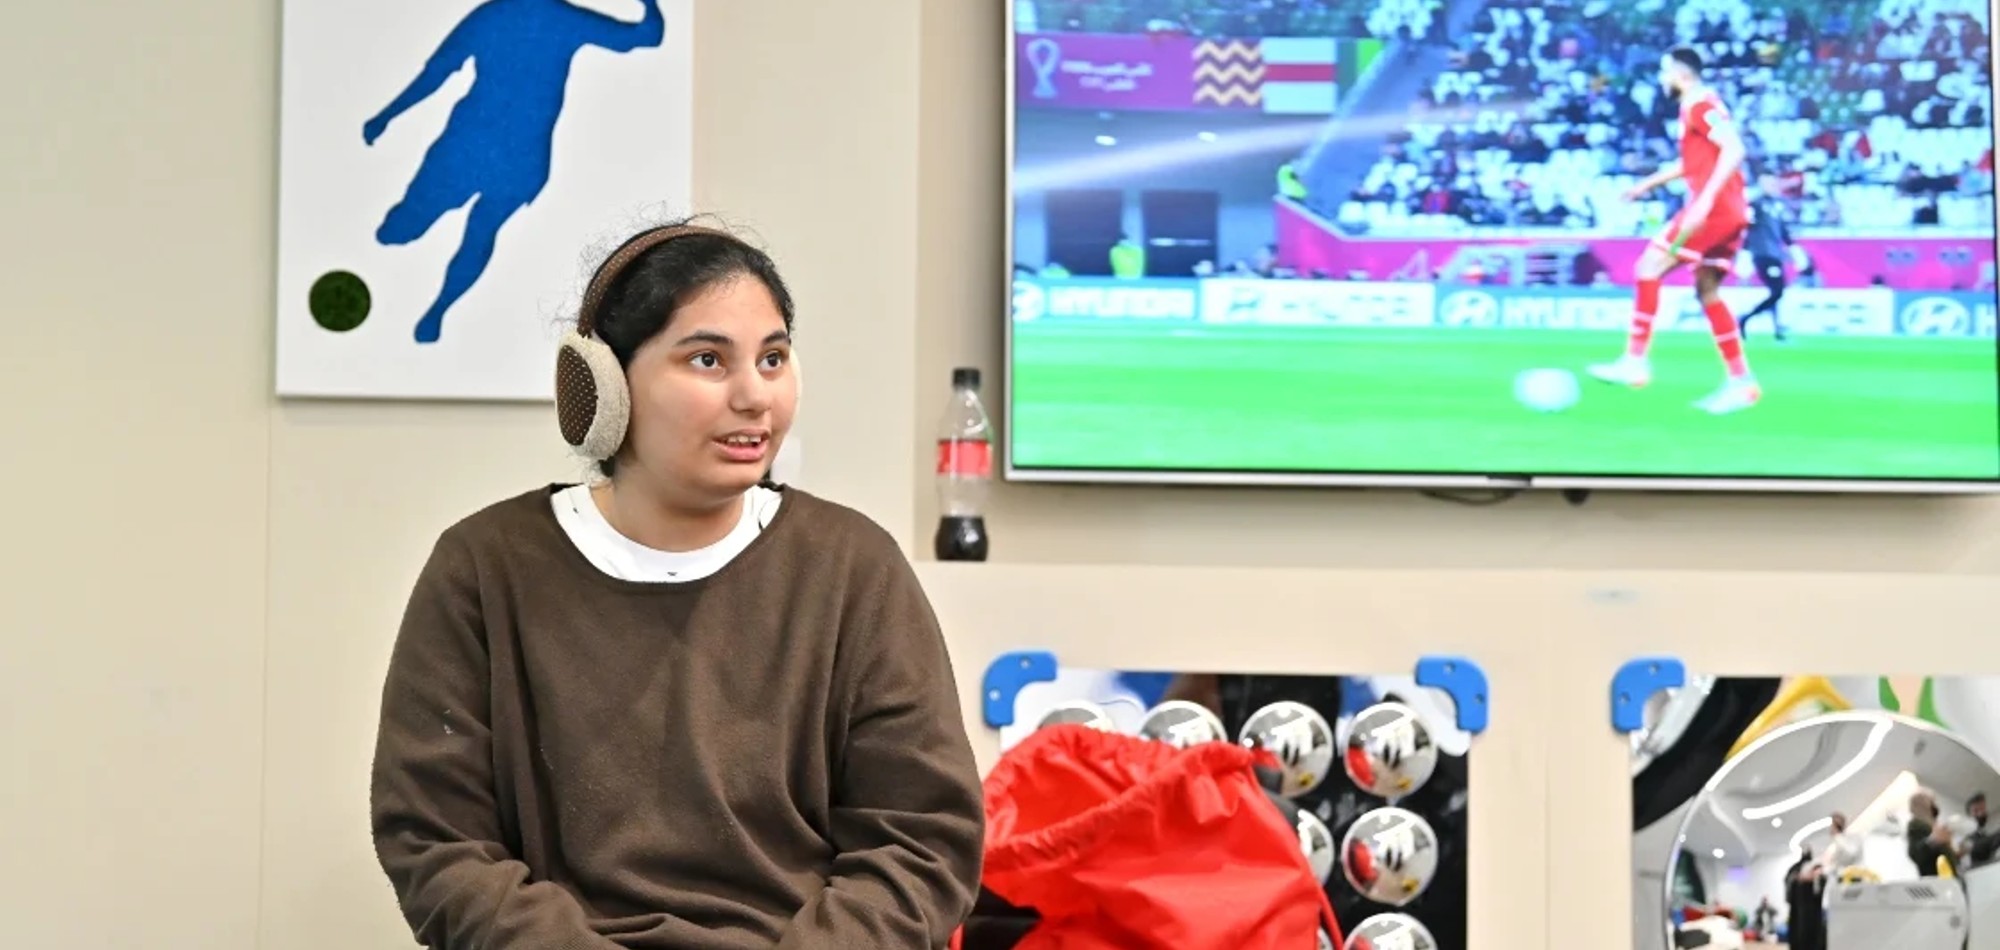 Sensory viewing room allows children with sensory requirements to enjoy FIFA Arab Cup™ matches